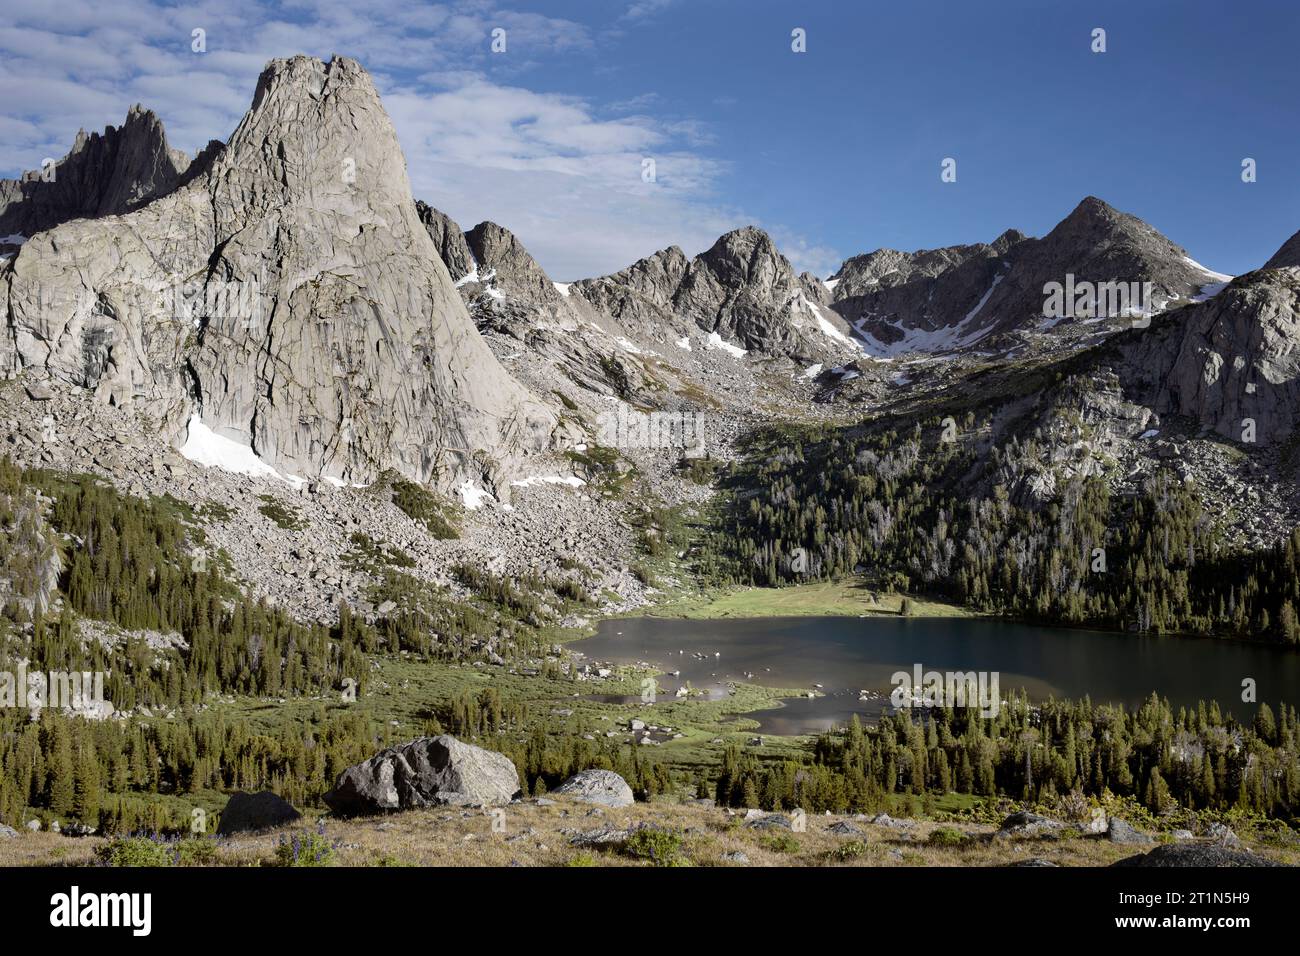 WY05451-00....WYOMING - Cirque of the Towers e Lonesome Lake dal Jackass Pass, Popo Agie Wilderness, Shoshone National Forest. Foto Stock